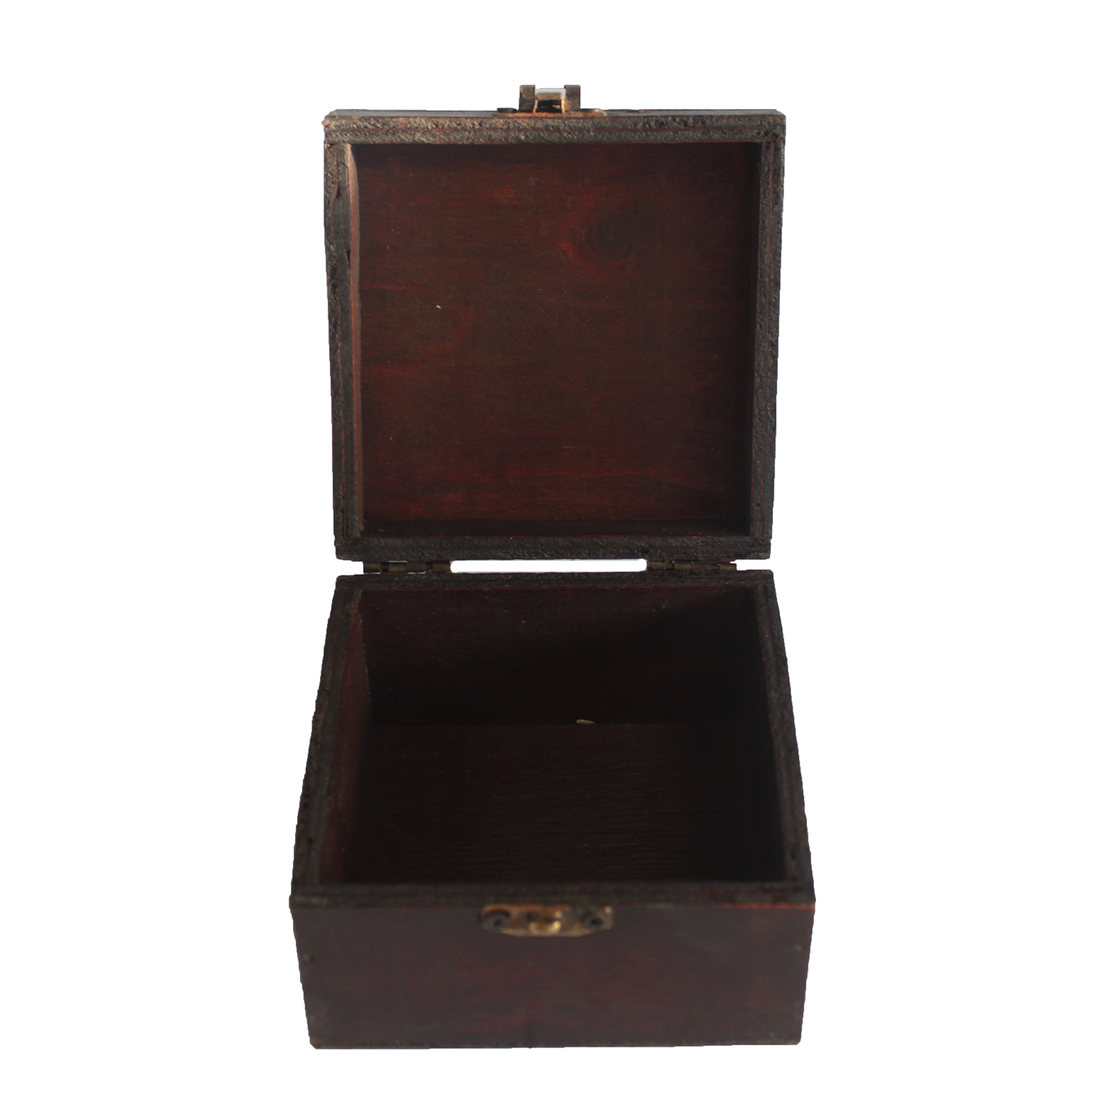 Set of 2 Gothic Square Boxes - best price from Maltashopper.com COLB-26